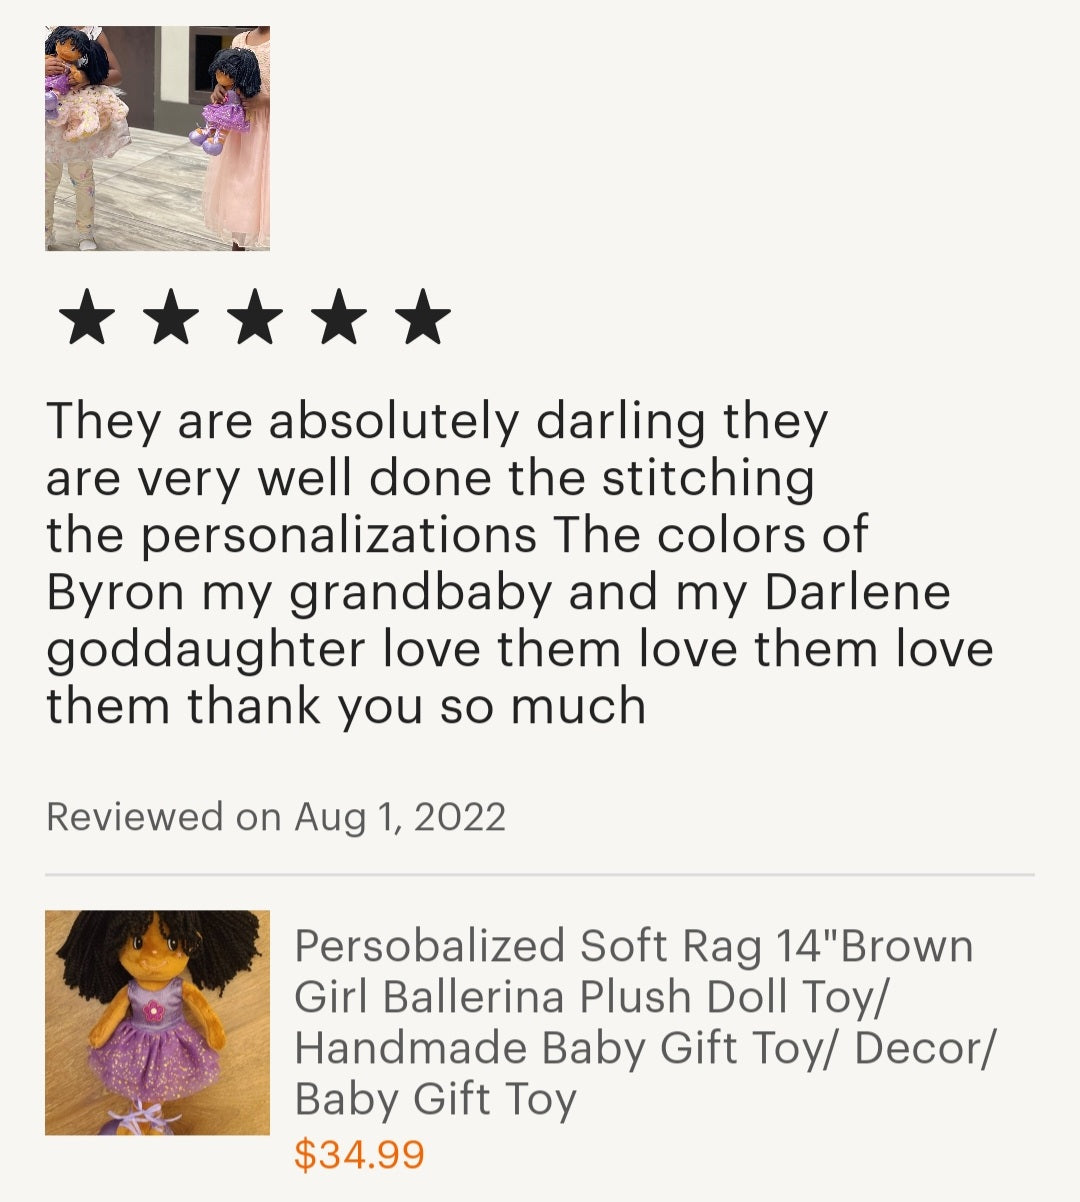 Personalized Soft Rag 14"Brown Girl Ballerina Plush Doll Toy/Handmade Baby Gift Toy/ Decor/ Baby Gift Toy